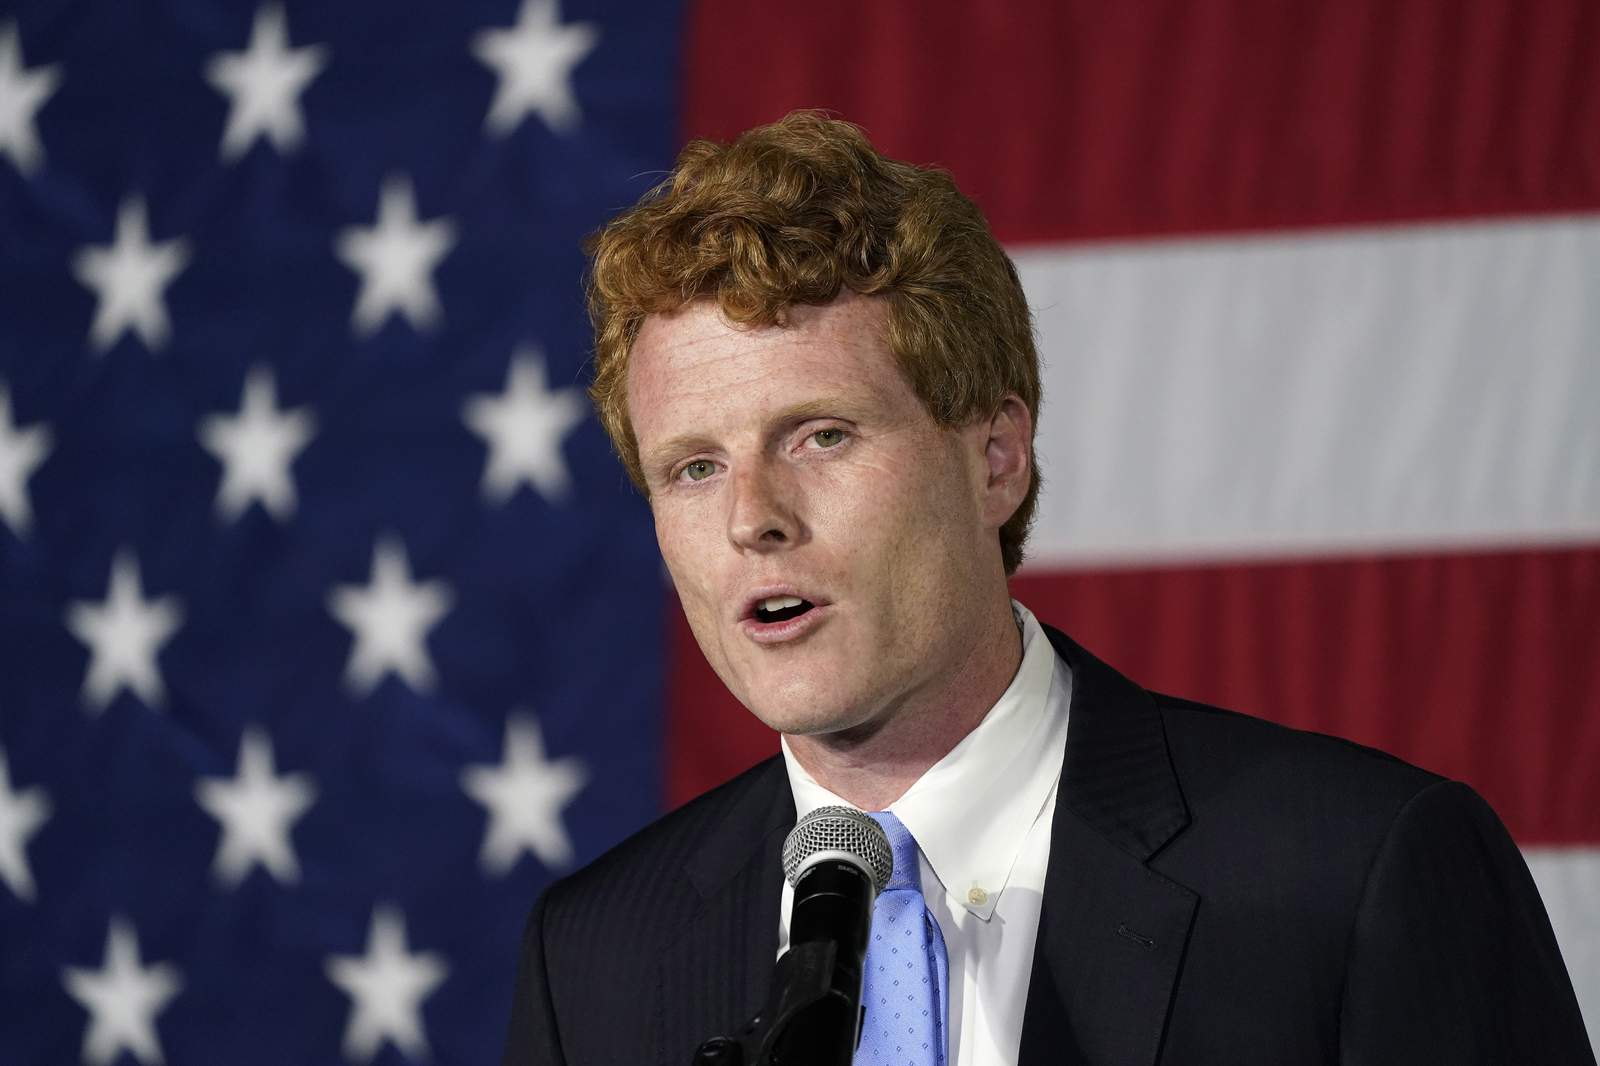 Retiring Rep. Kennedy says greed hinders aid to needy